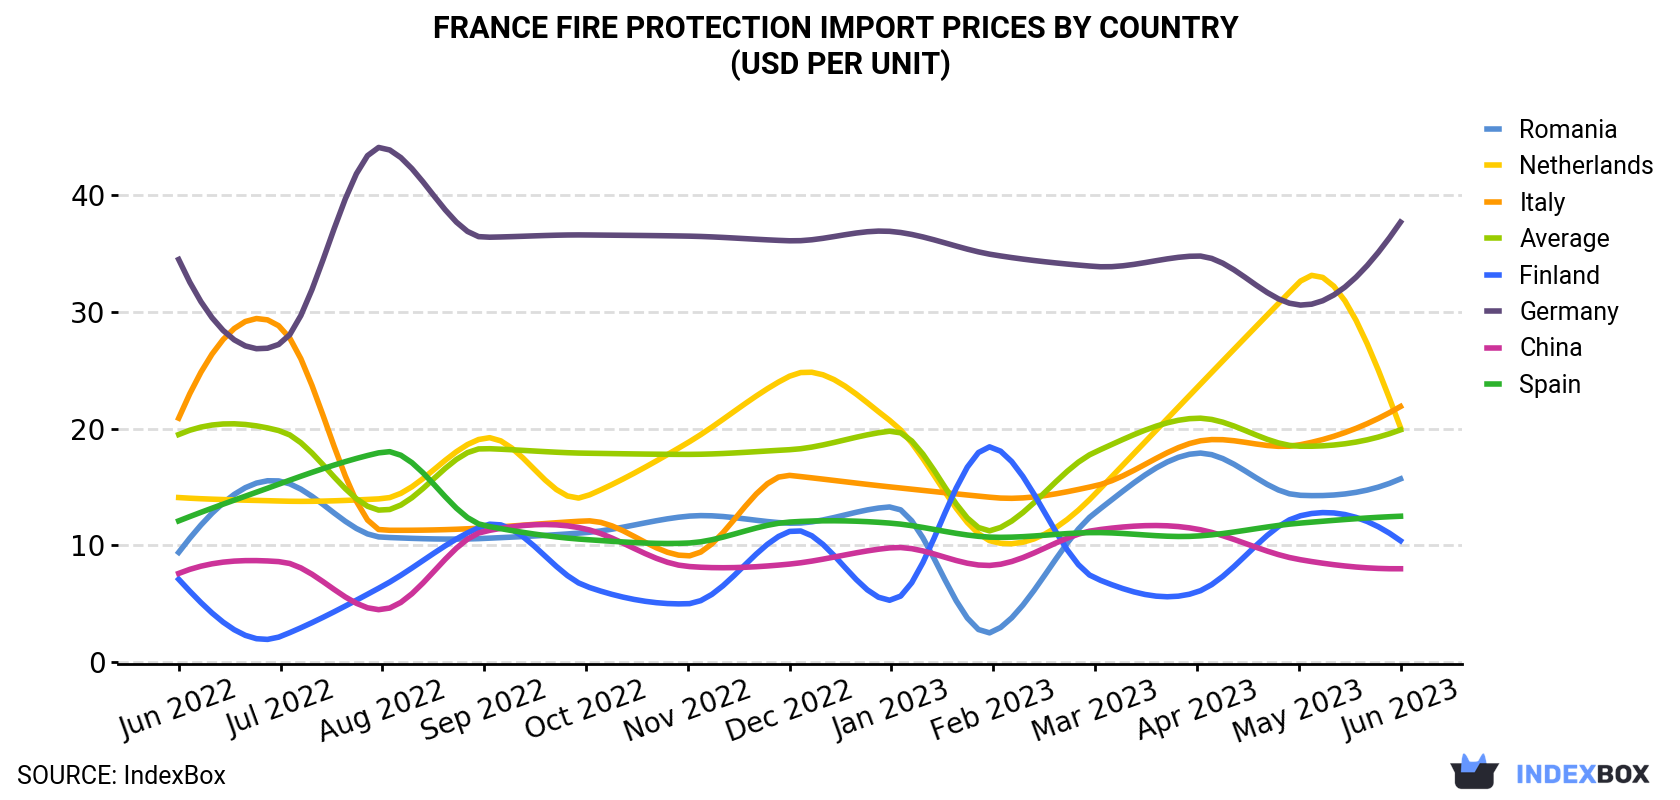 France Fire Protection Import Prices By Country (USD Per Unit)